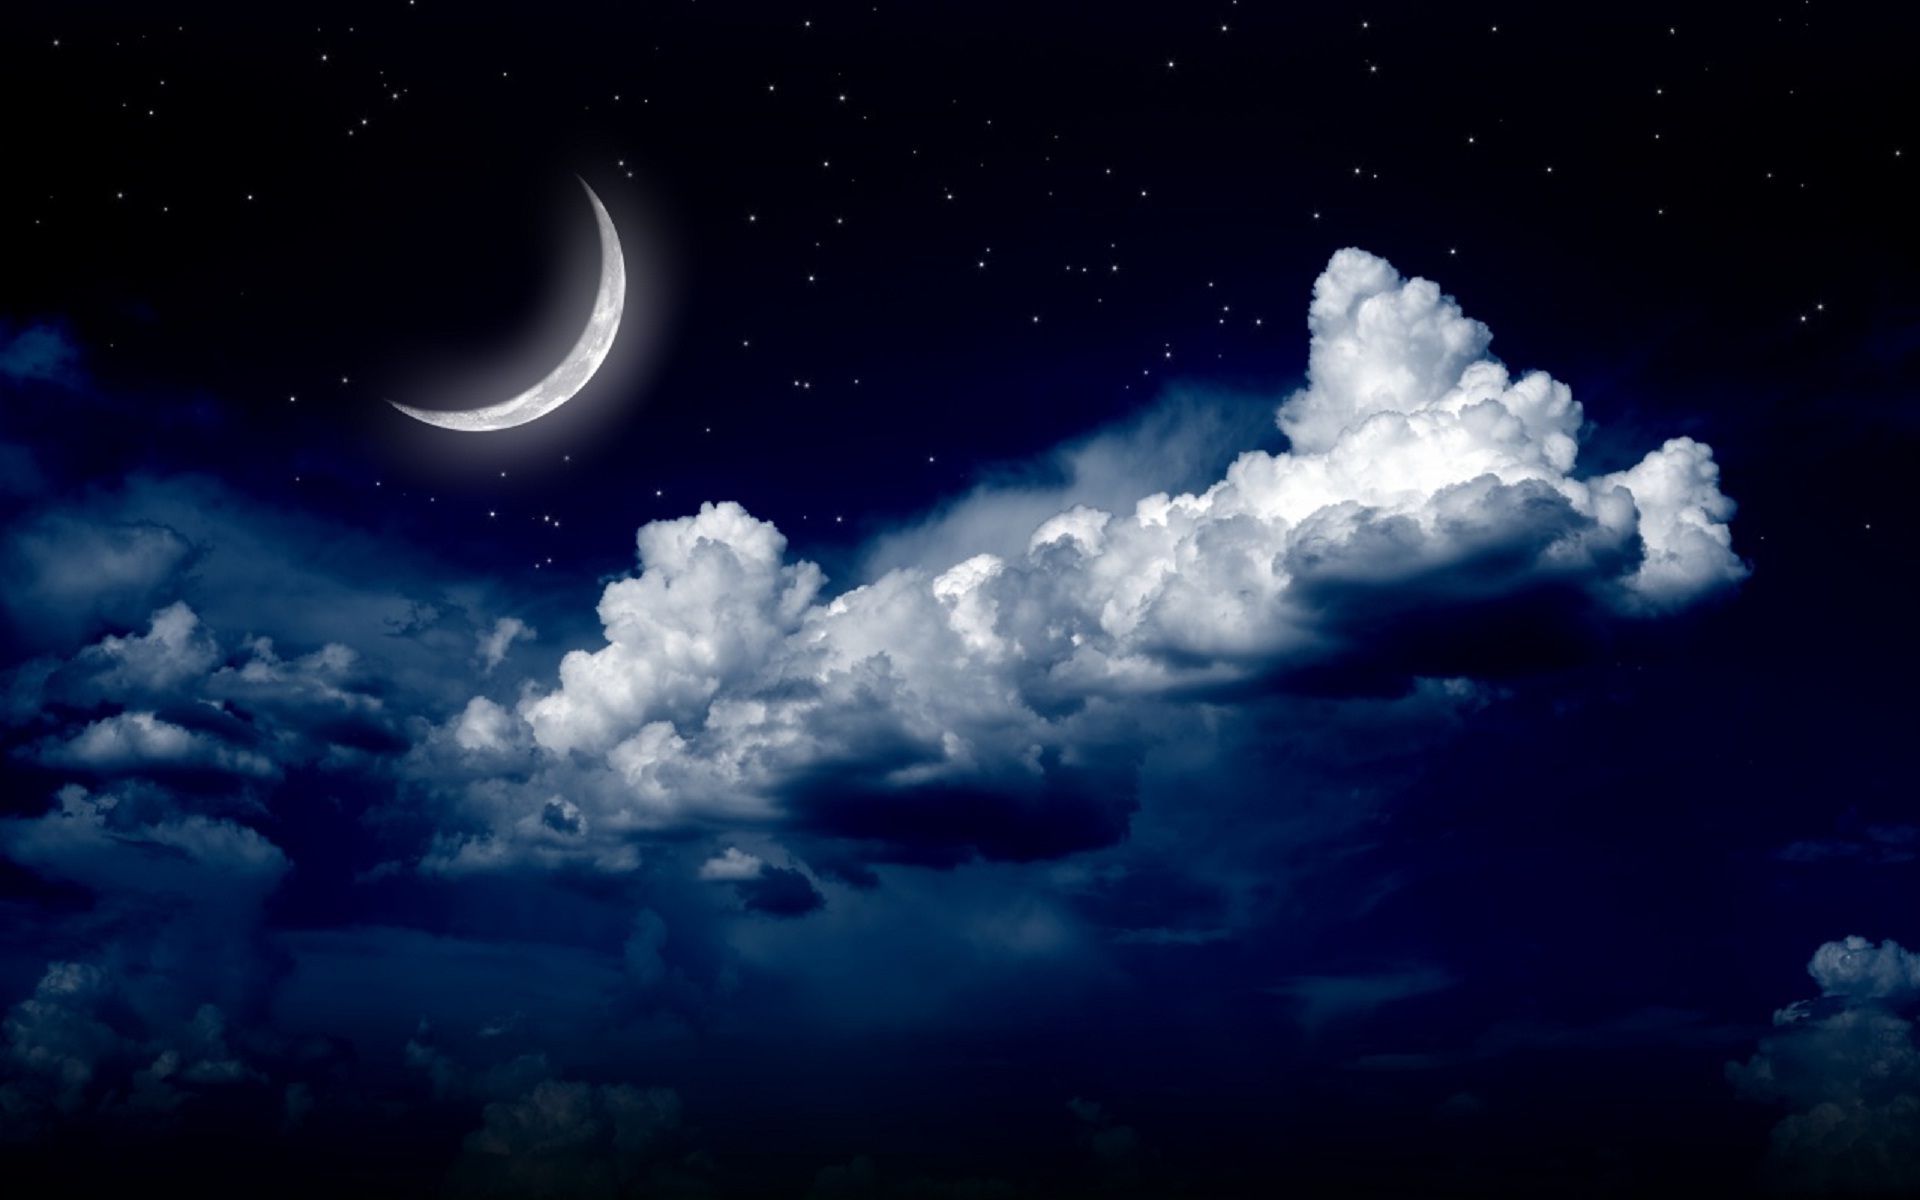 Fantasy Night Moon Clouds - Sky At Night Time - HD Wallpaper 